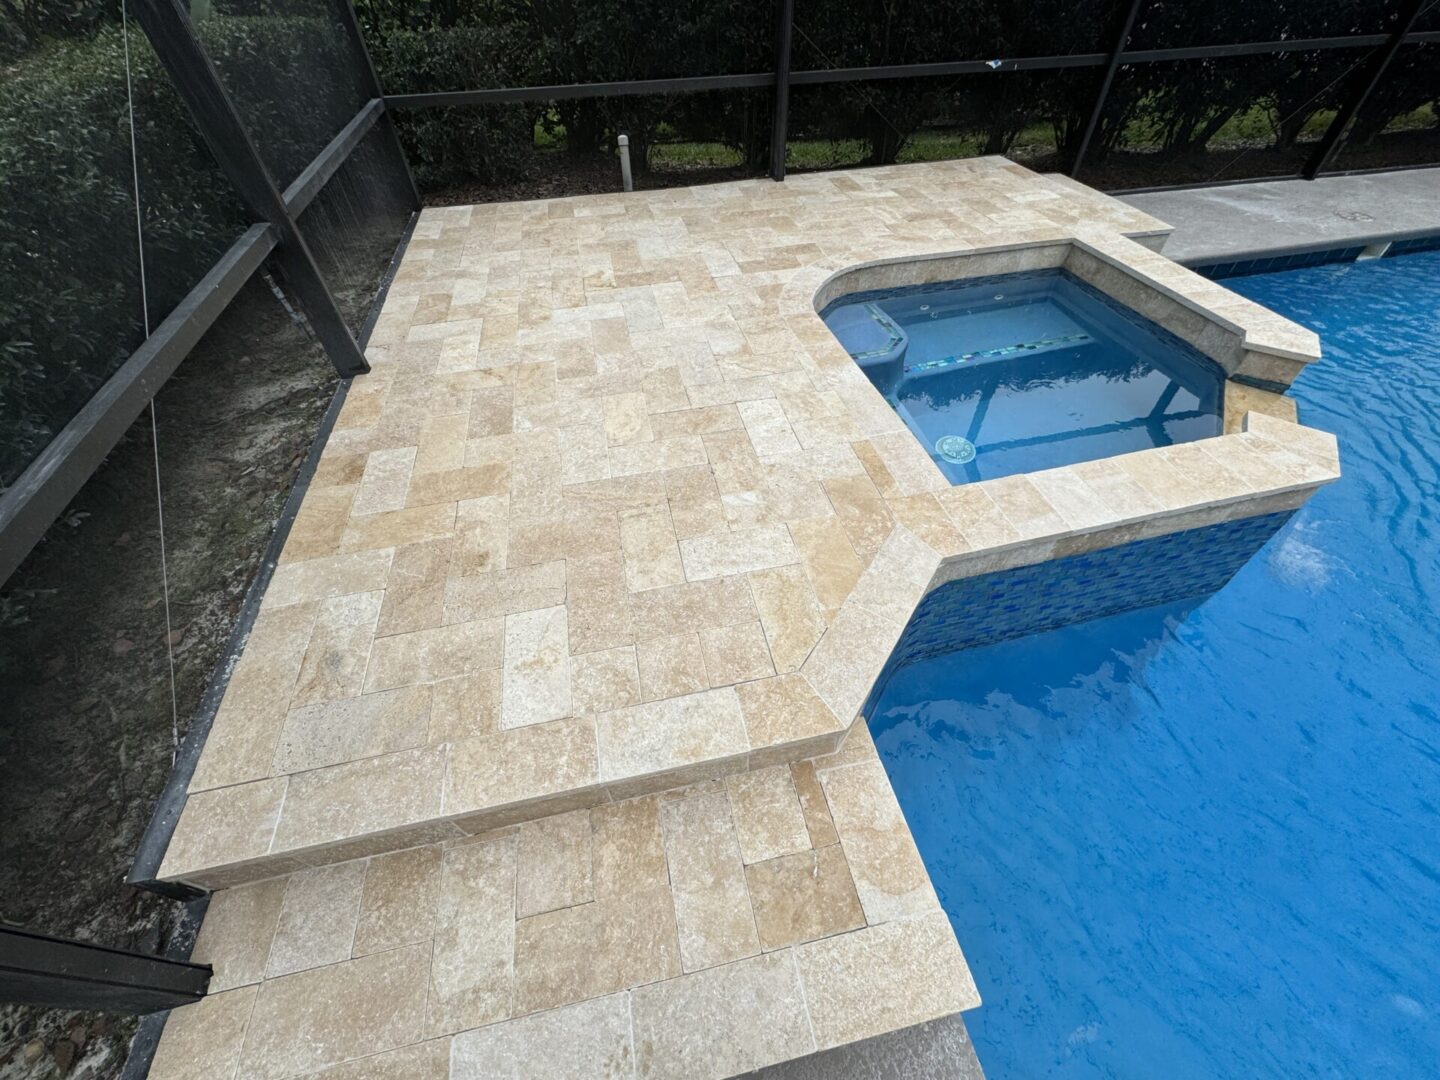 A swimming pool with an attached hot tub, surrounded by beige stone tiles and enclosed by a black mesh fence.